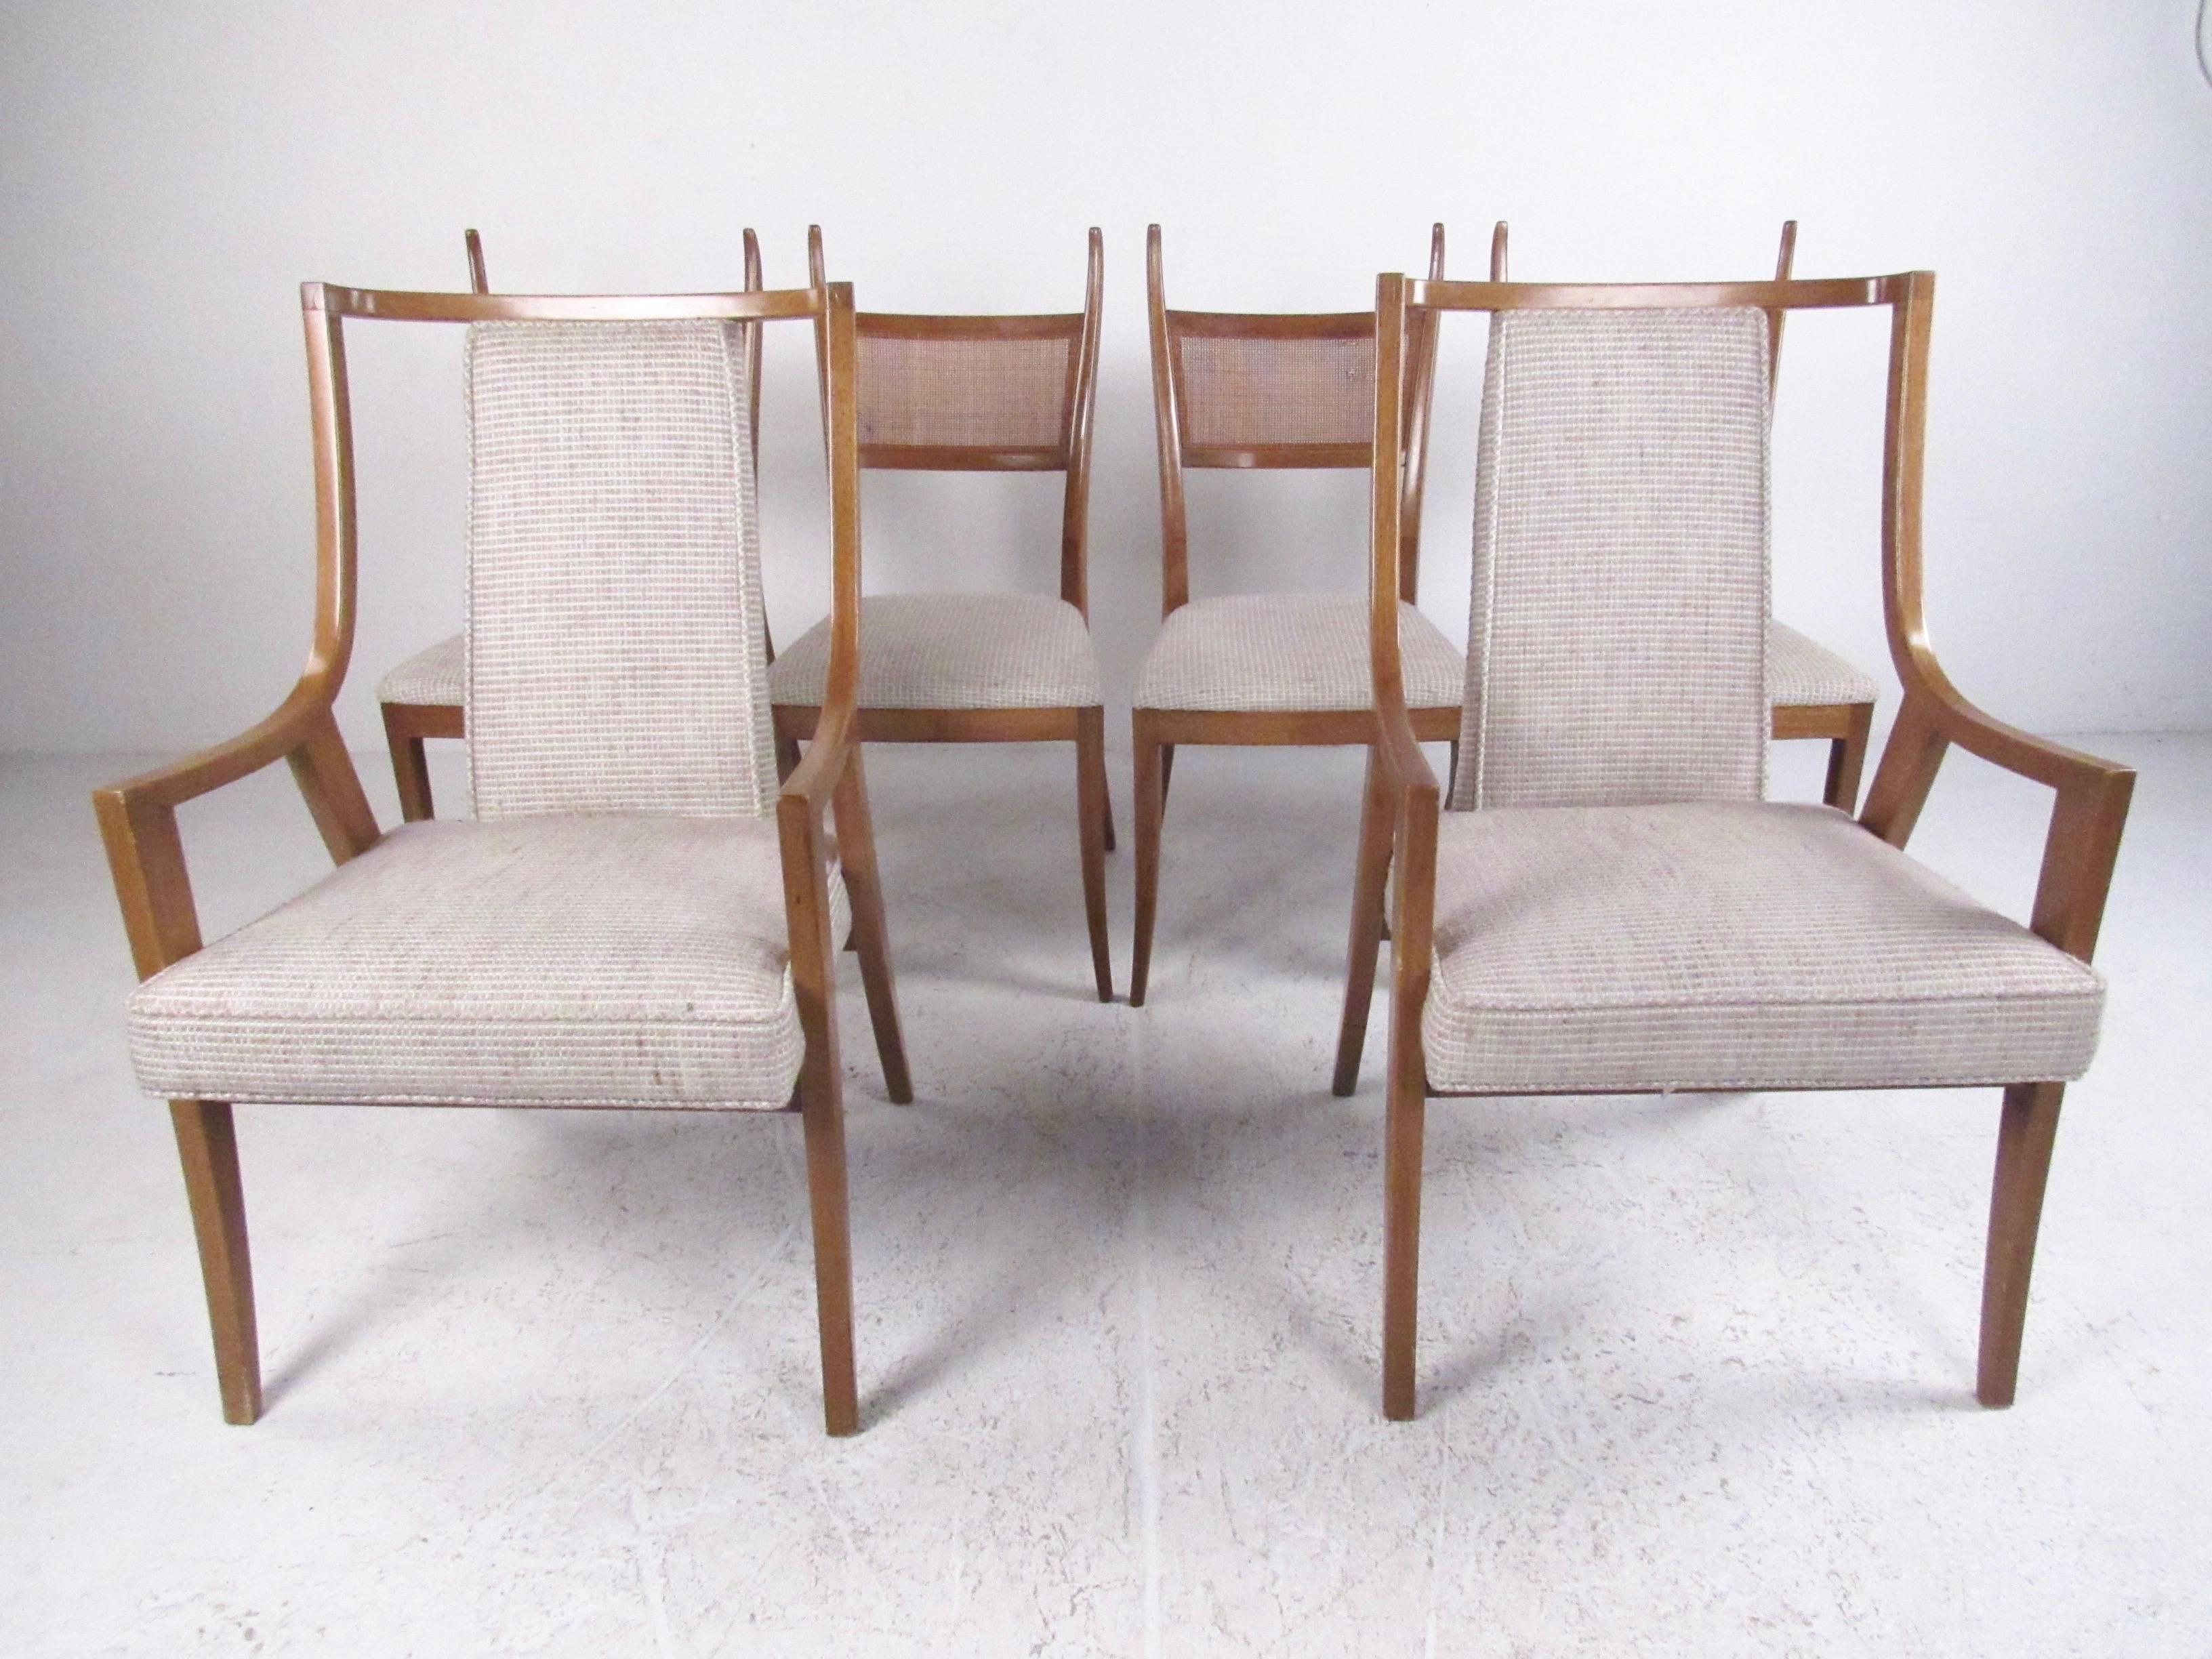 This stylish set of midcentury dining chairs features the unique sculptural design of Harvey Probber, making a comfortable yet stylish addition to any dining room setting. Four matched side chairs are paired with two sleek mahogany armchairs. The